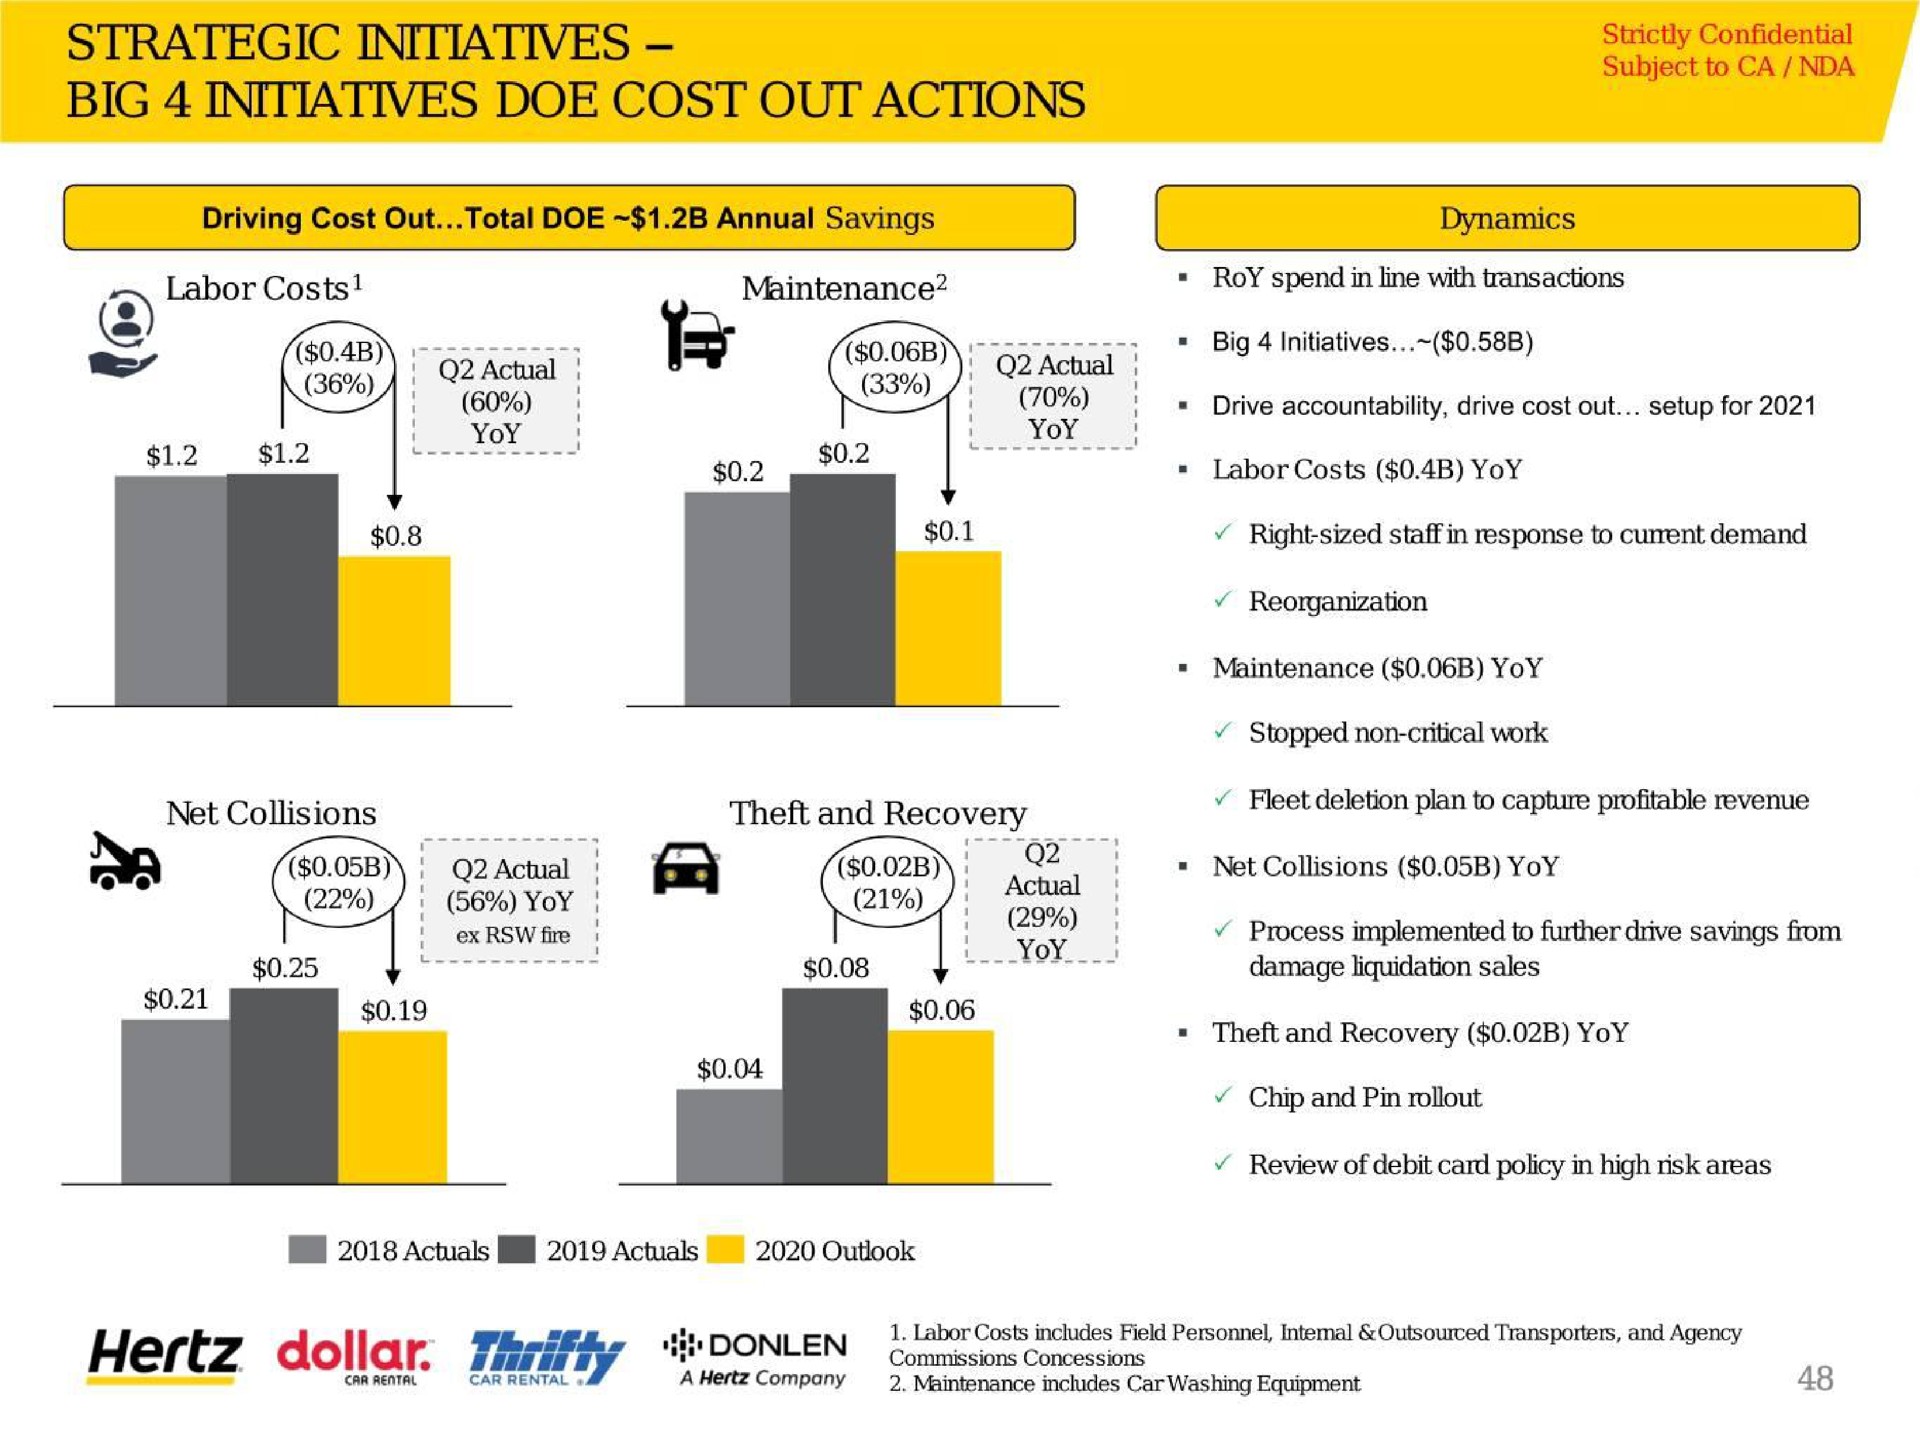 strategic initiatives big initiatives doe cost out actions driving out total doe annual savings confidential | Hertz